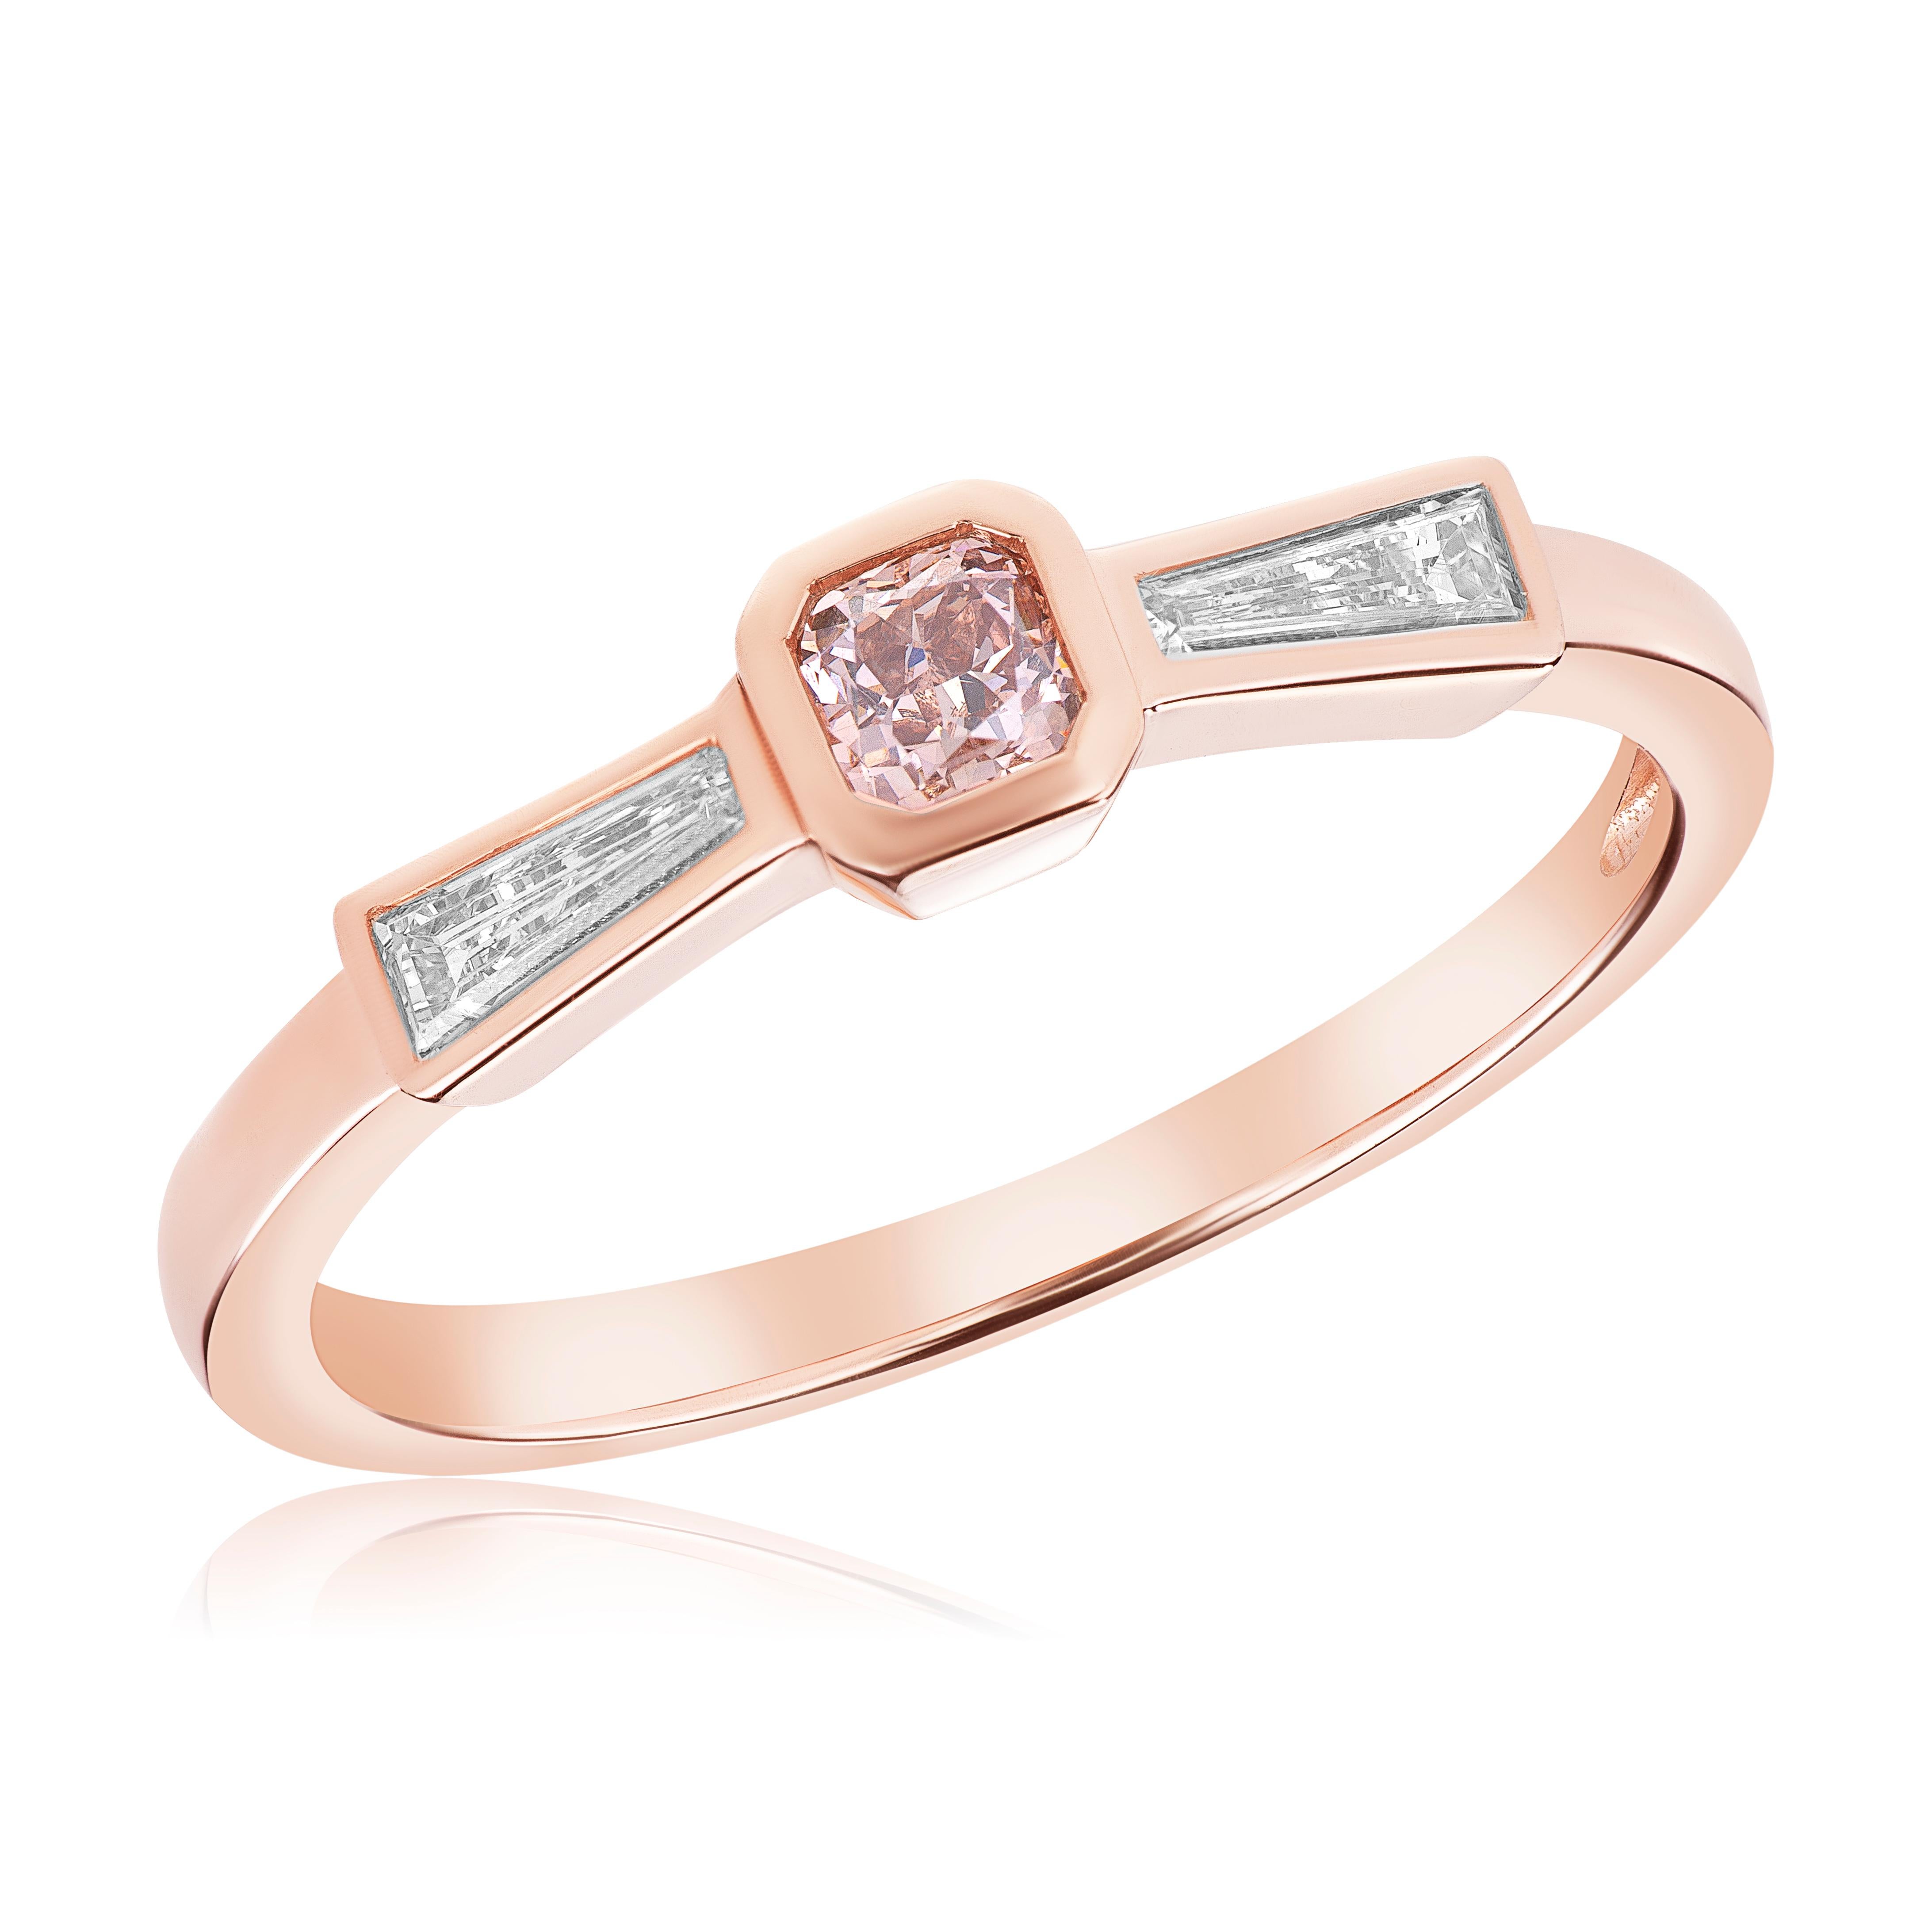 Introducing a captivating rose gold stackable ring that will elevate your style with its exquisite design. This stunning ring features a 0.18-carat fancy pink cushion-cut diamond, radiating with a soft and feminine hue. The diamond is beautifully